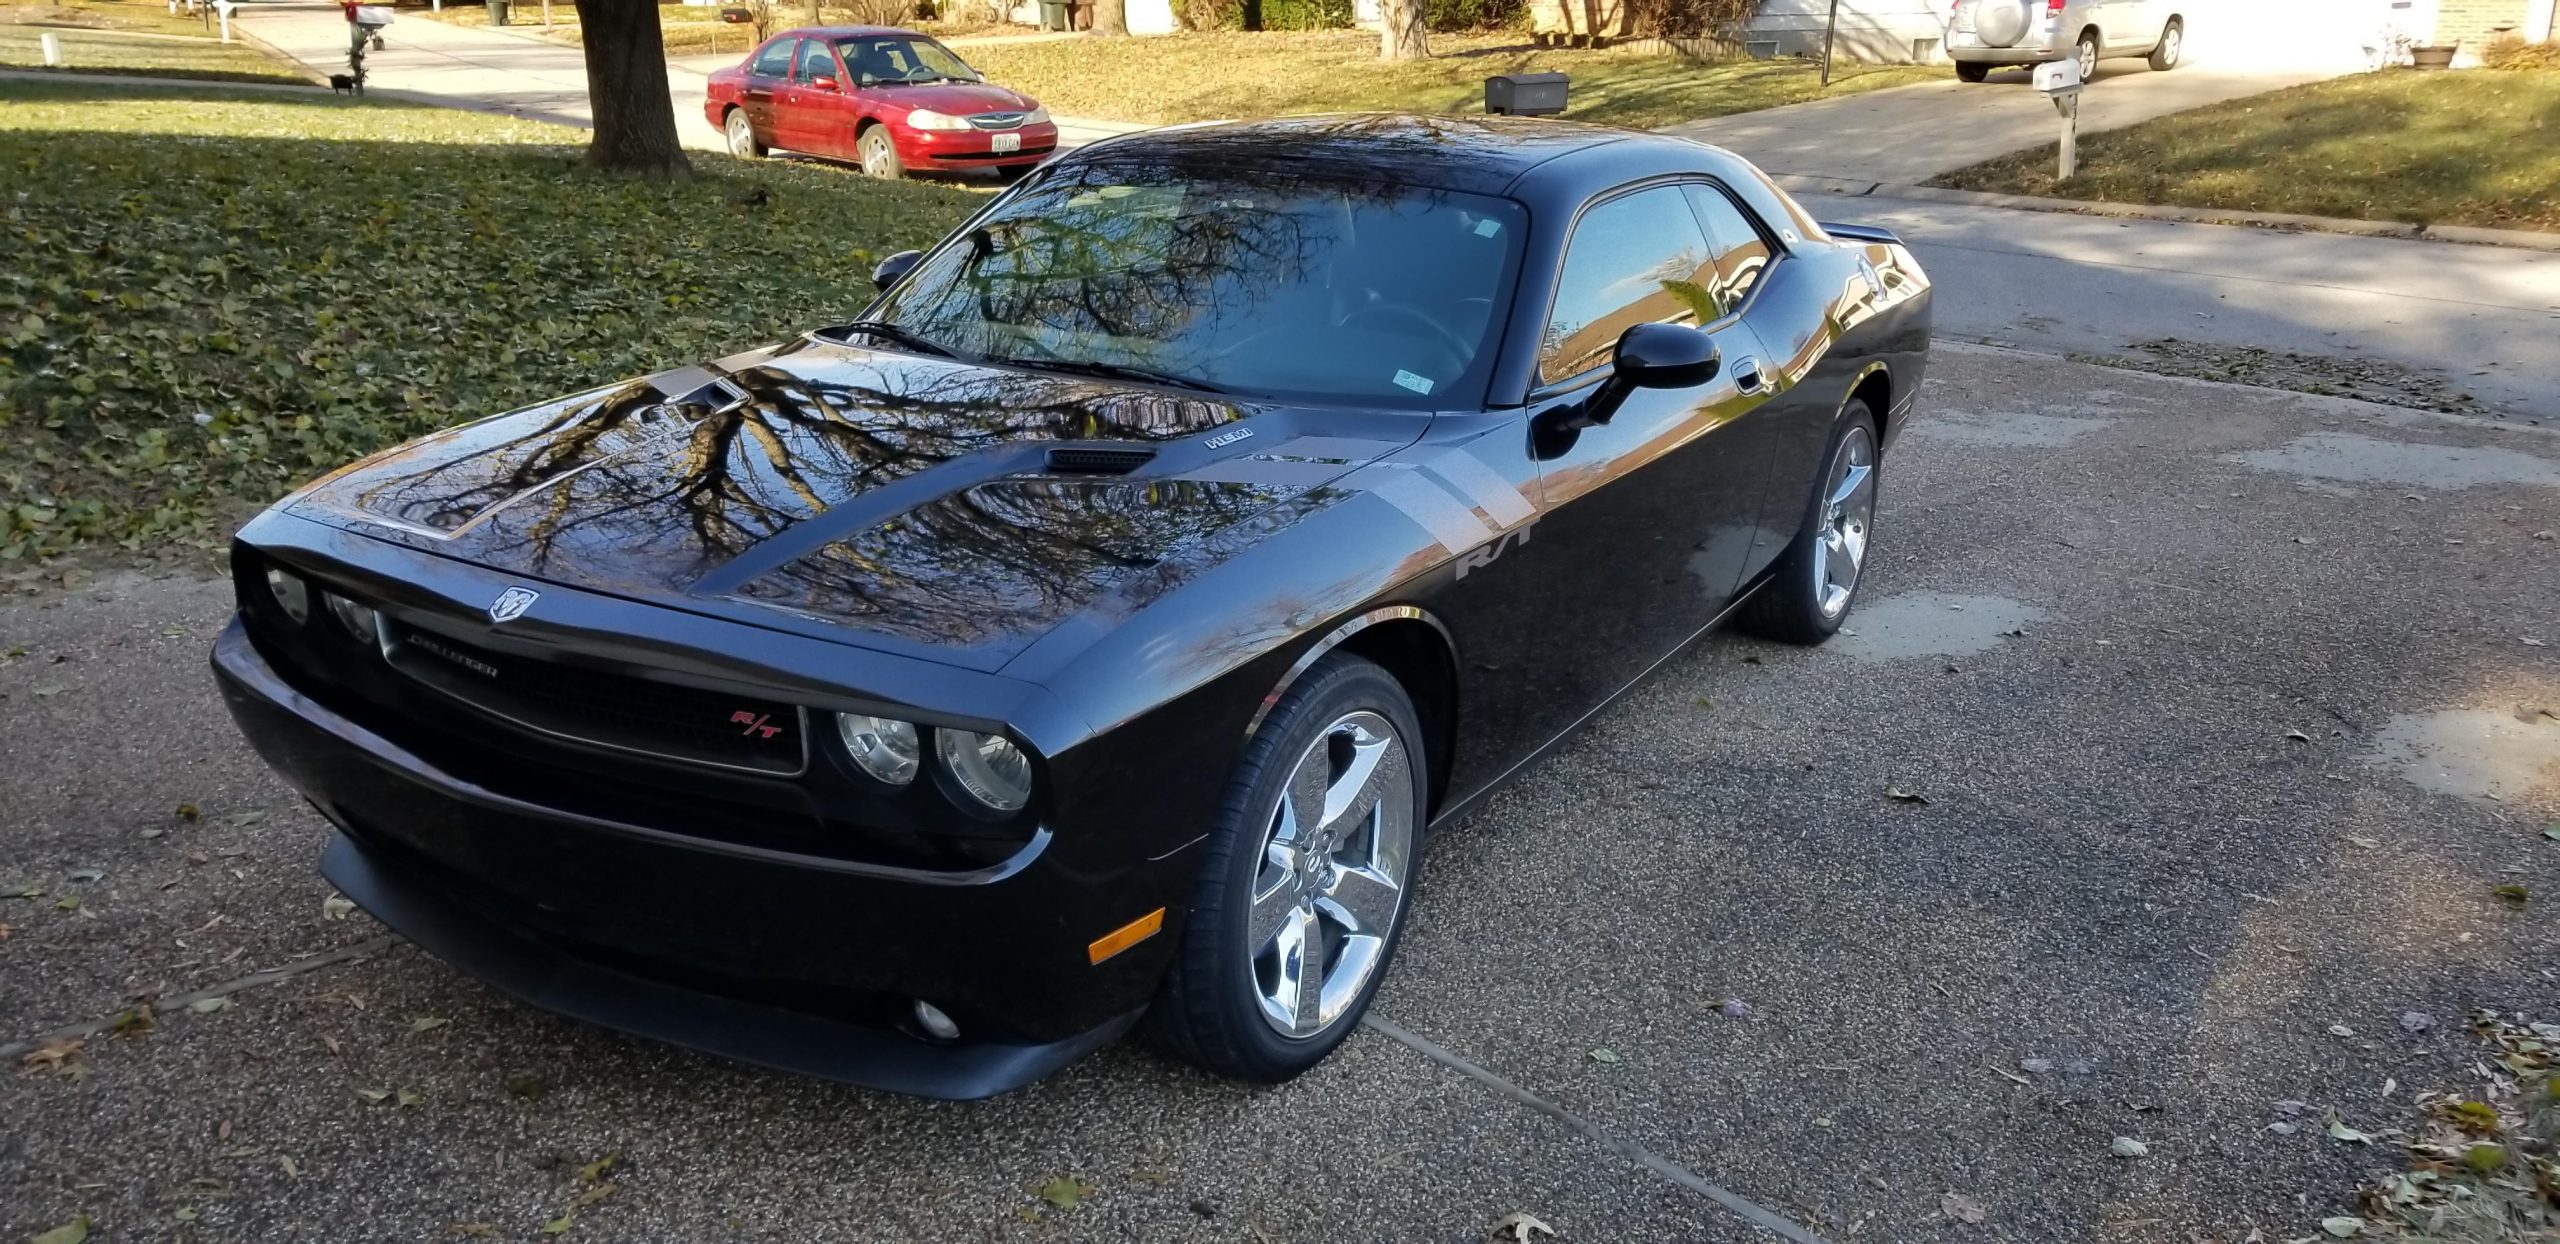 Didn’t see many of them on here, so here’s my 2009 Challenger R/T!